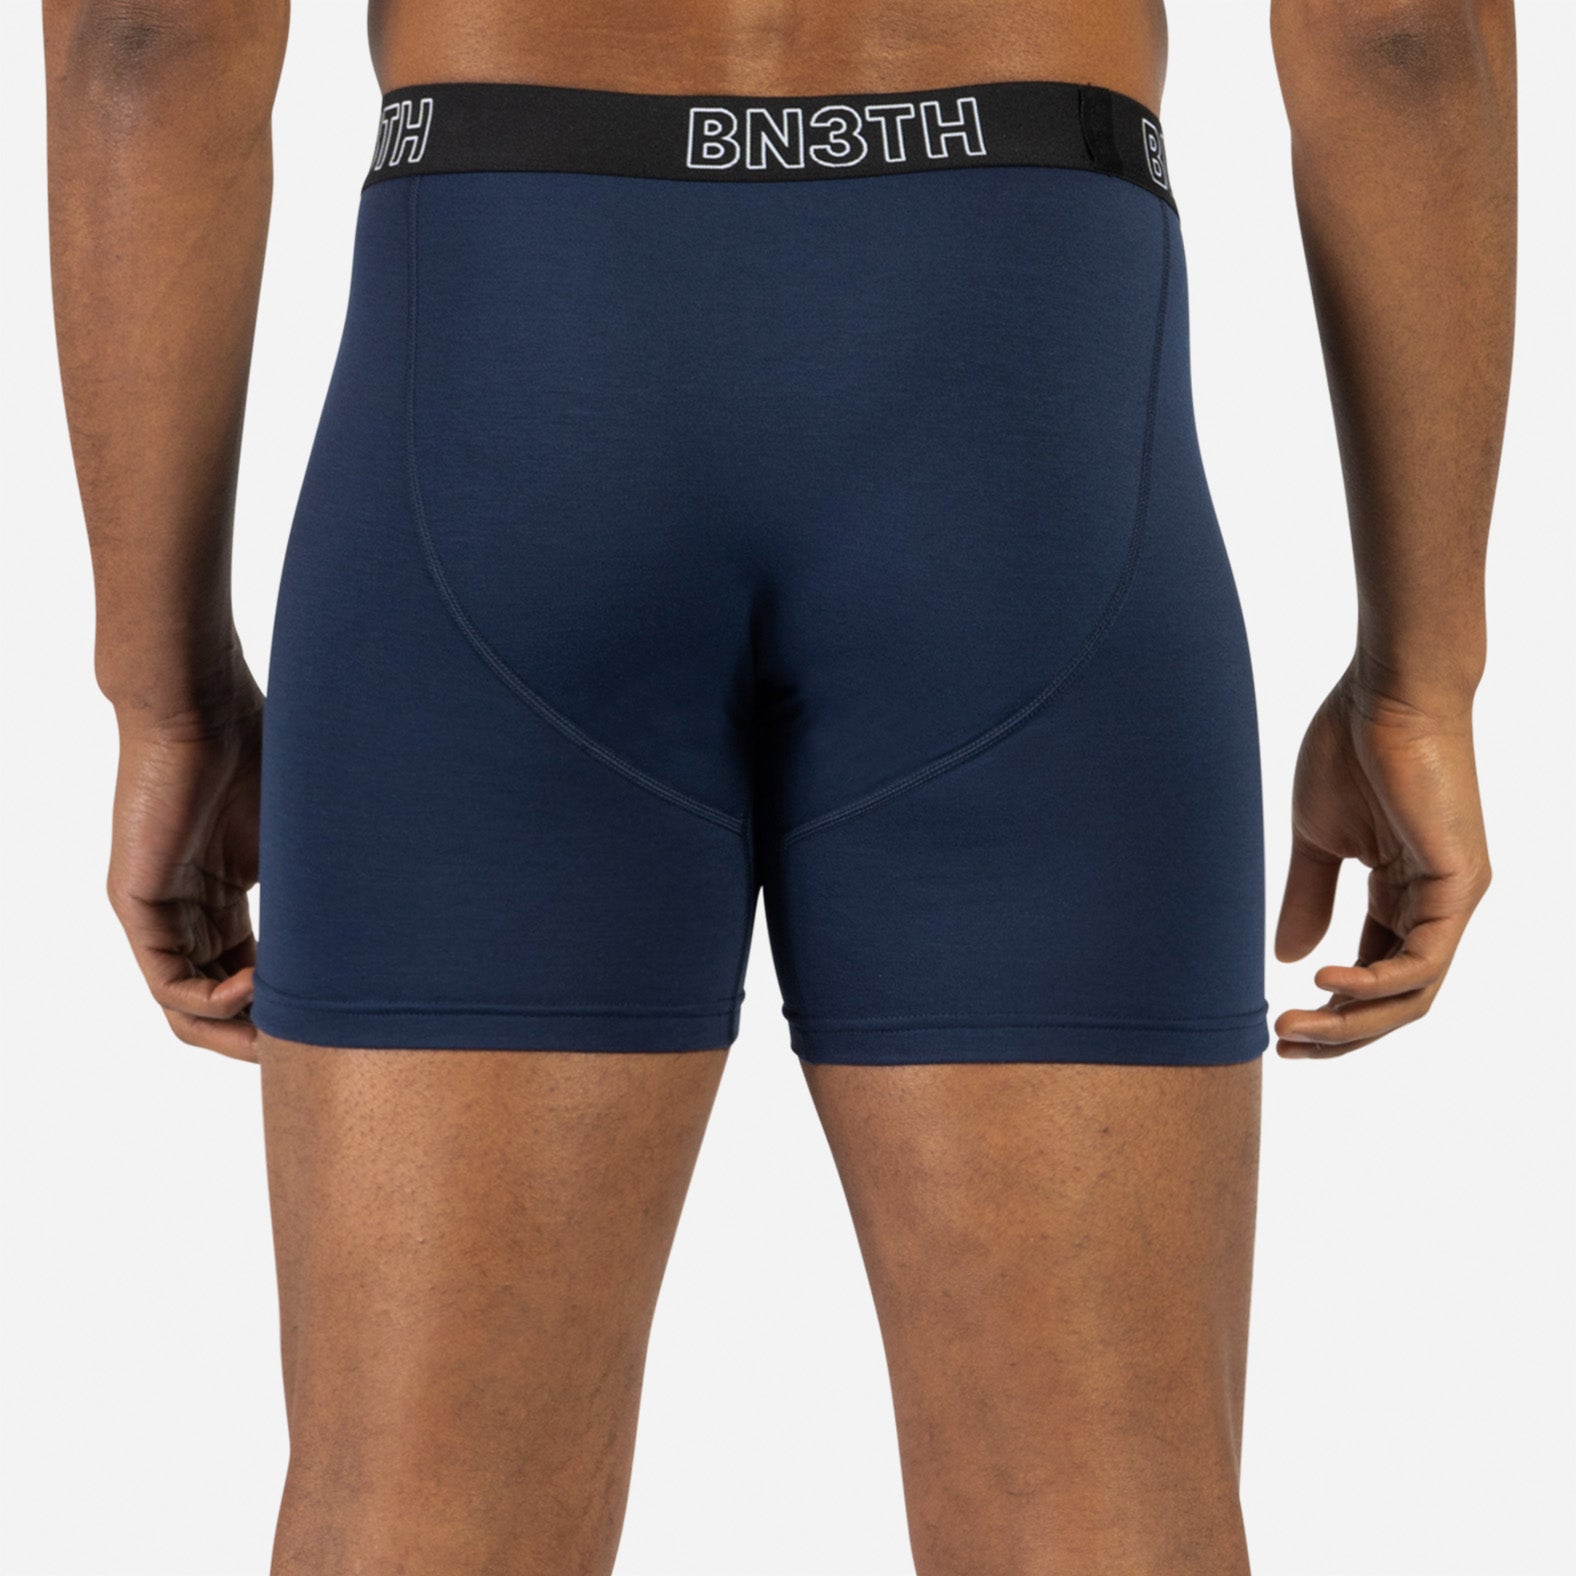 INCEPTION BOXER BRIEF: NAVAL ACADEMY/FLORAL FIELD NAVAL 2 PACK